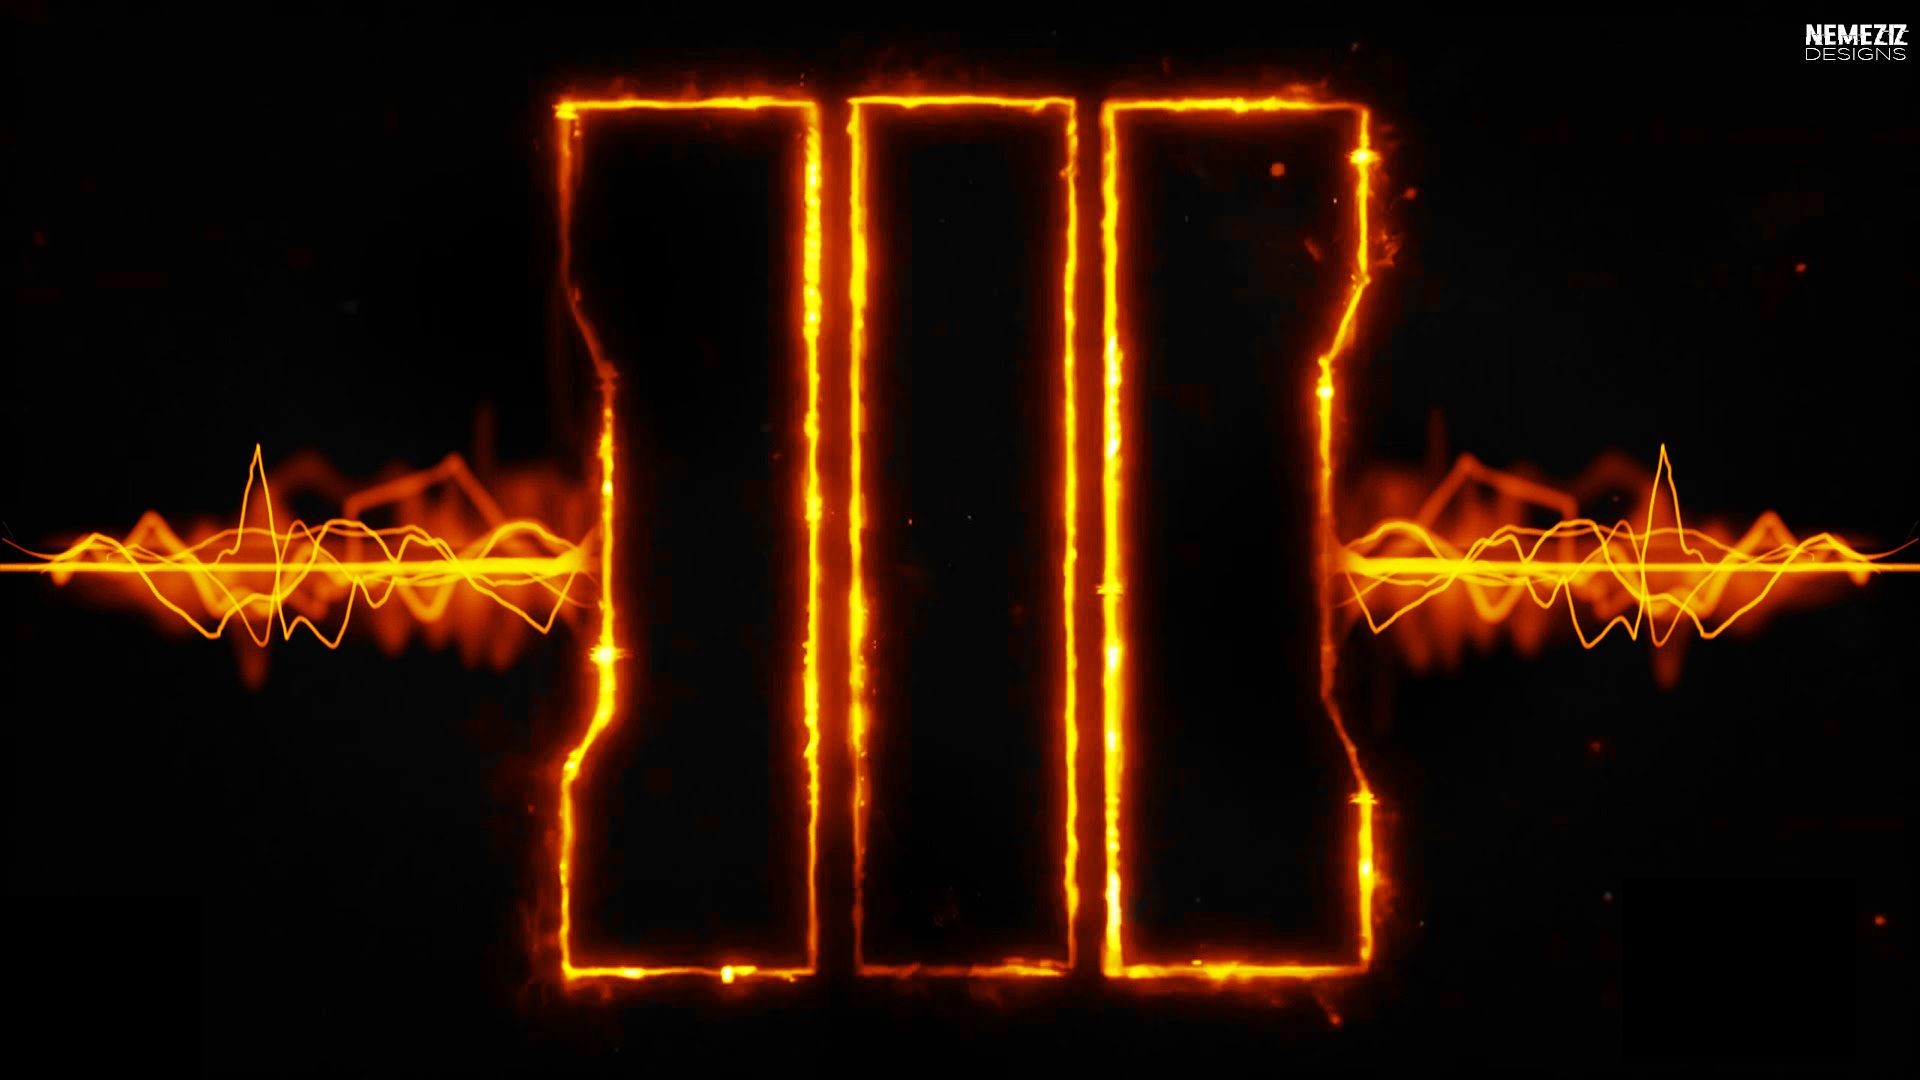 1920x1080 Image for Call of Duty Black Ops III Cool Wallpapers HD for Desktop |  Drawing | Black ops 3, Cod black ops 3, Black ops